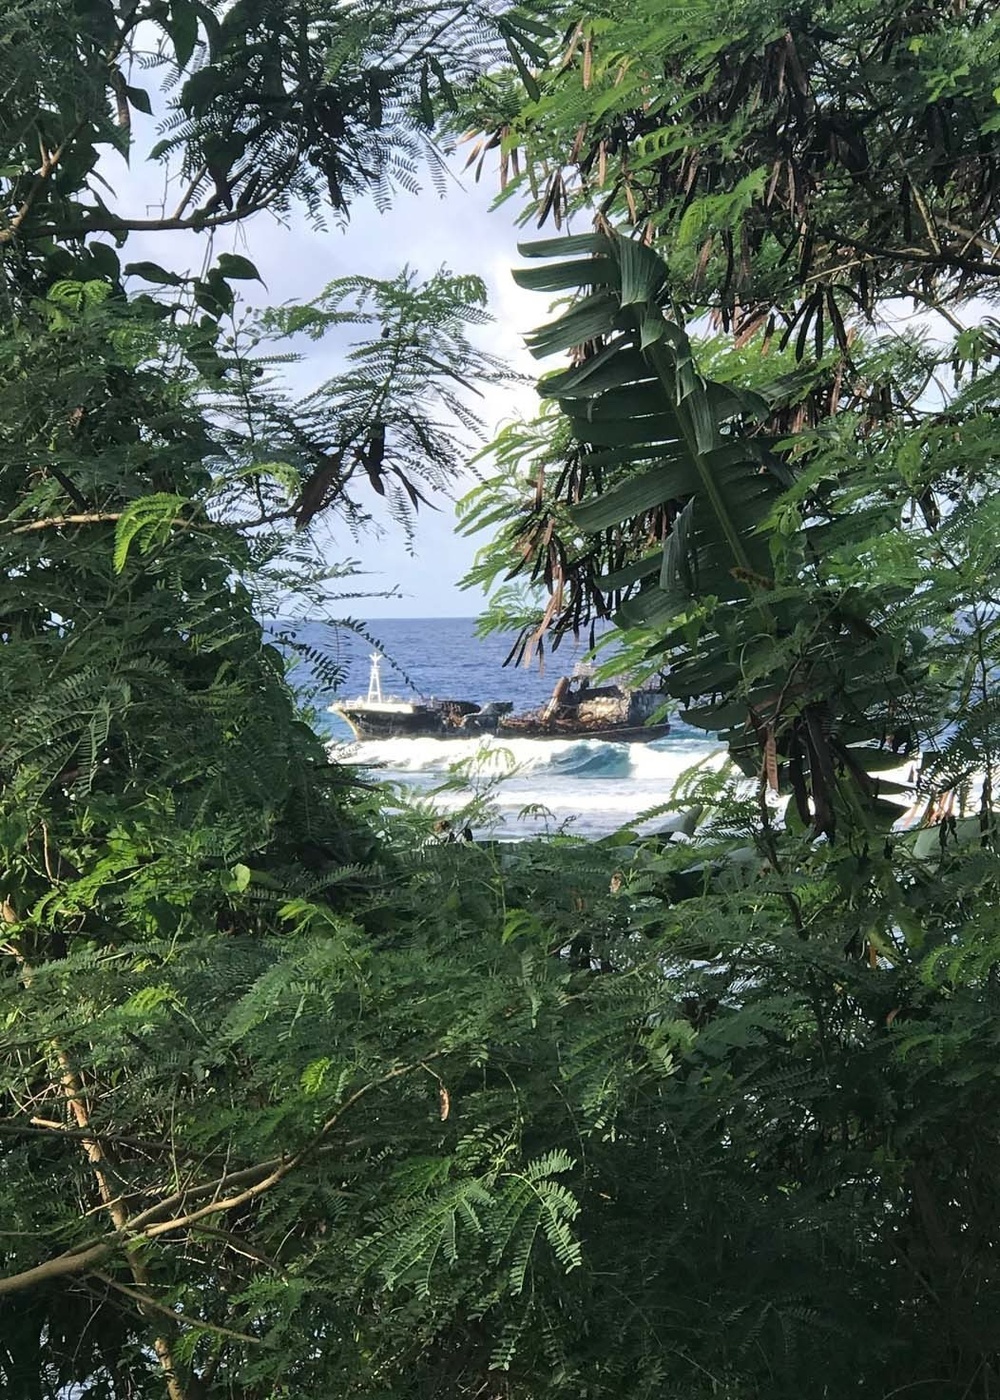 Coast Guard, partners respond to report of grounded fishing vessel in American Samoa